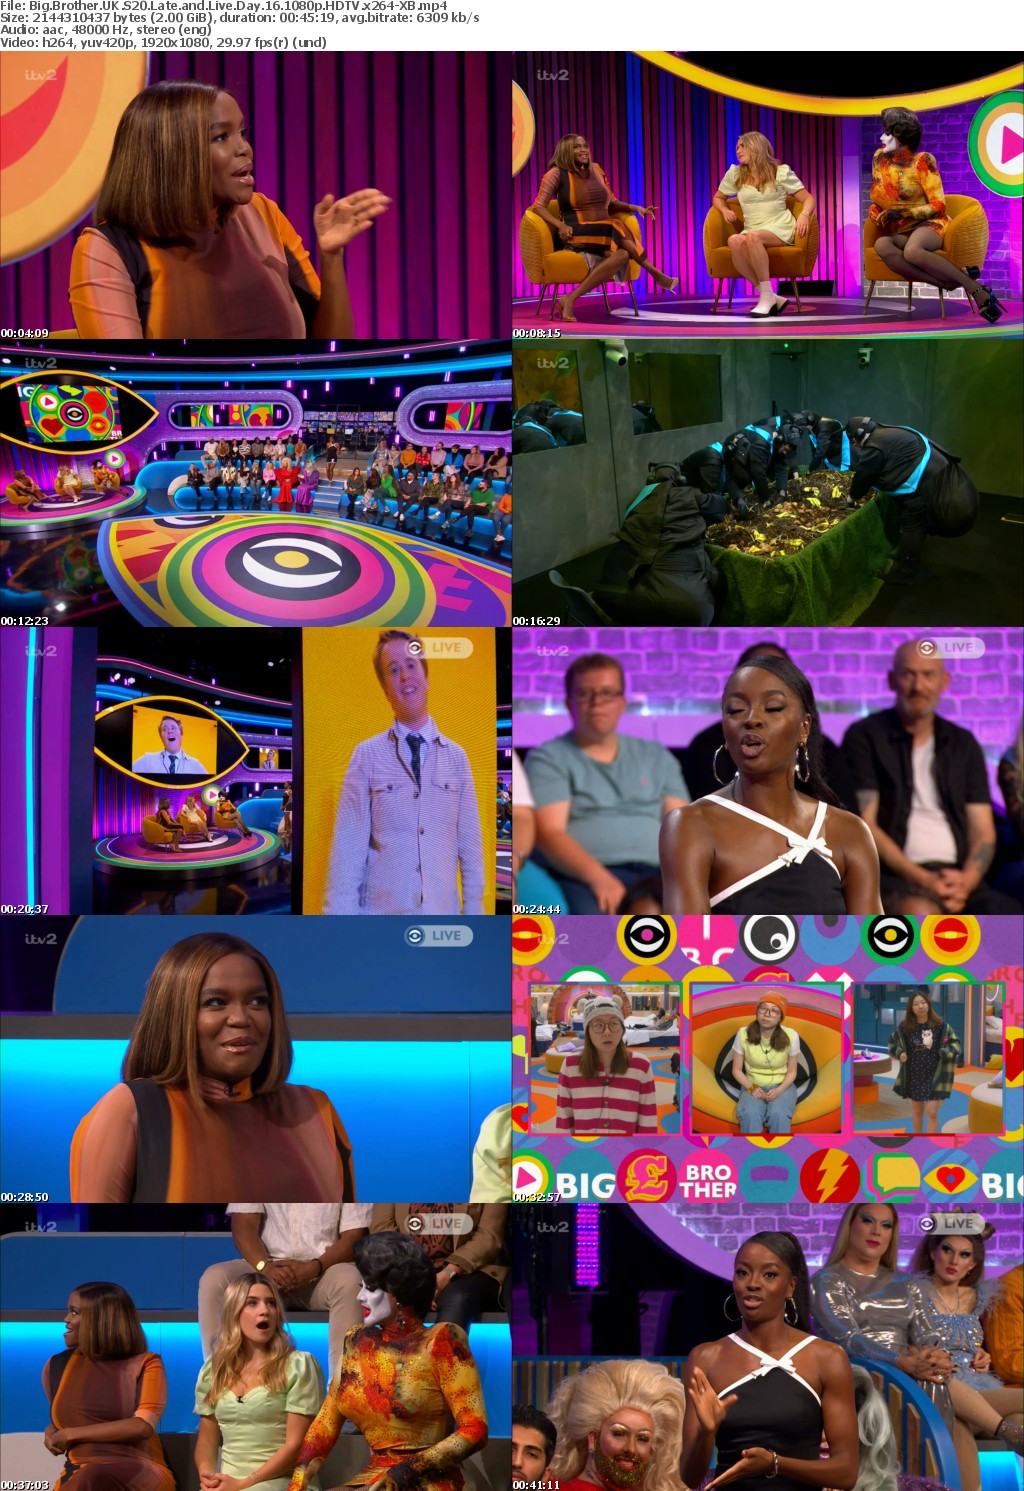 Big Brother UK S20 Late and Live Day 16 1080p HDTV x264-XB